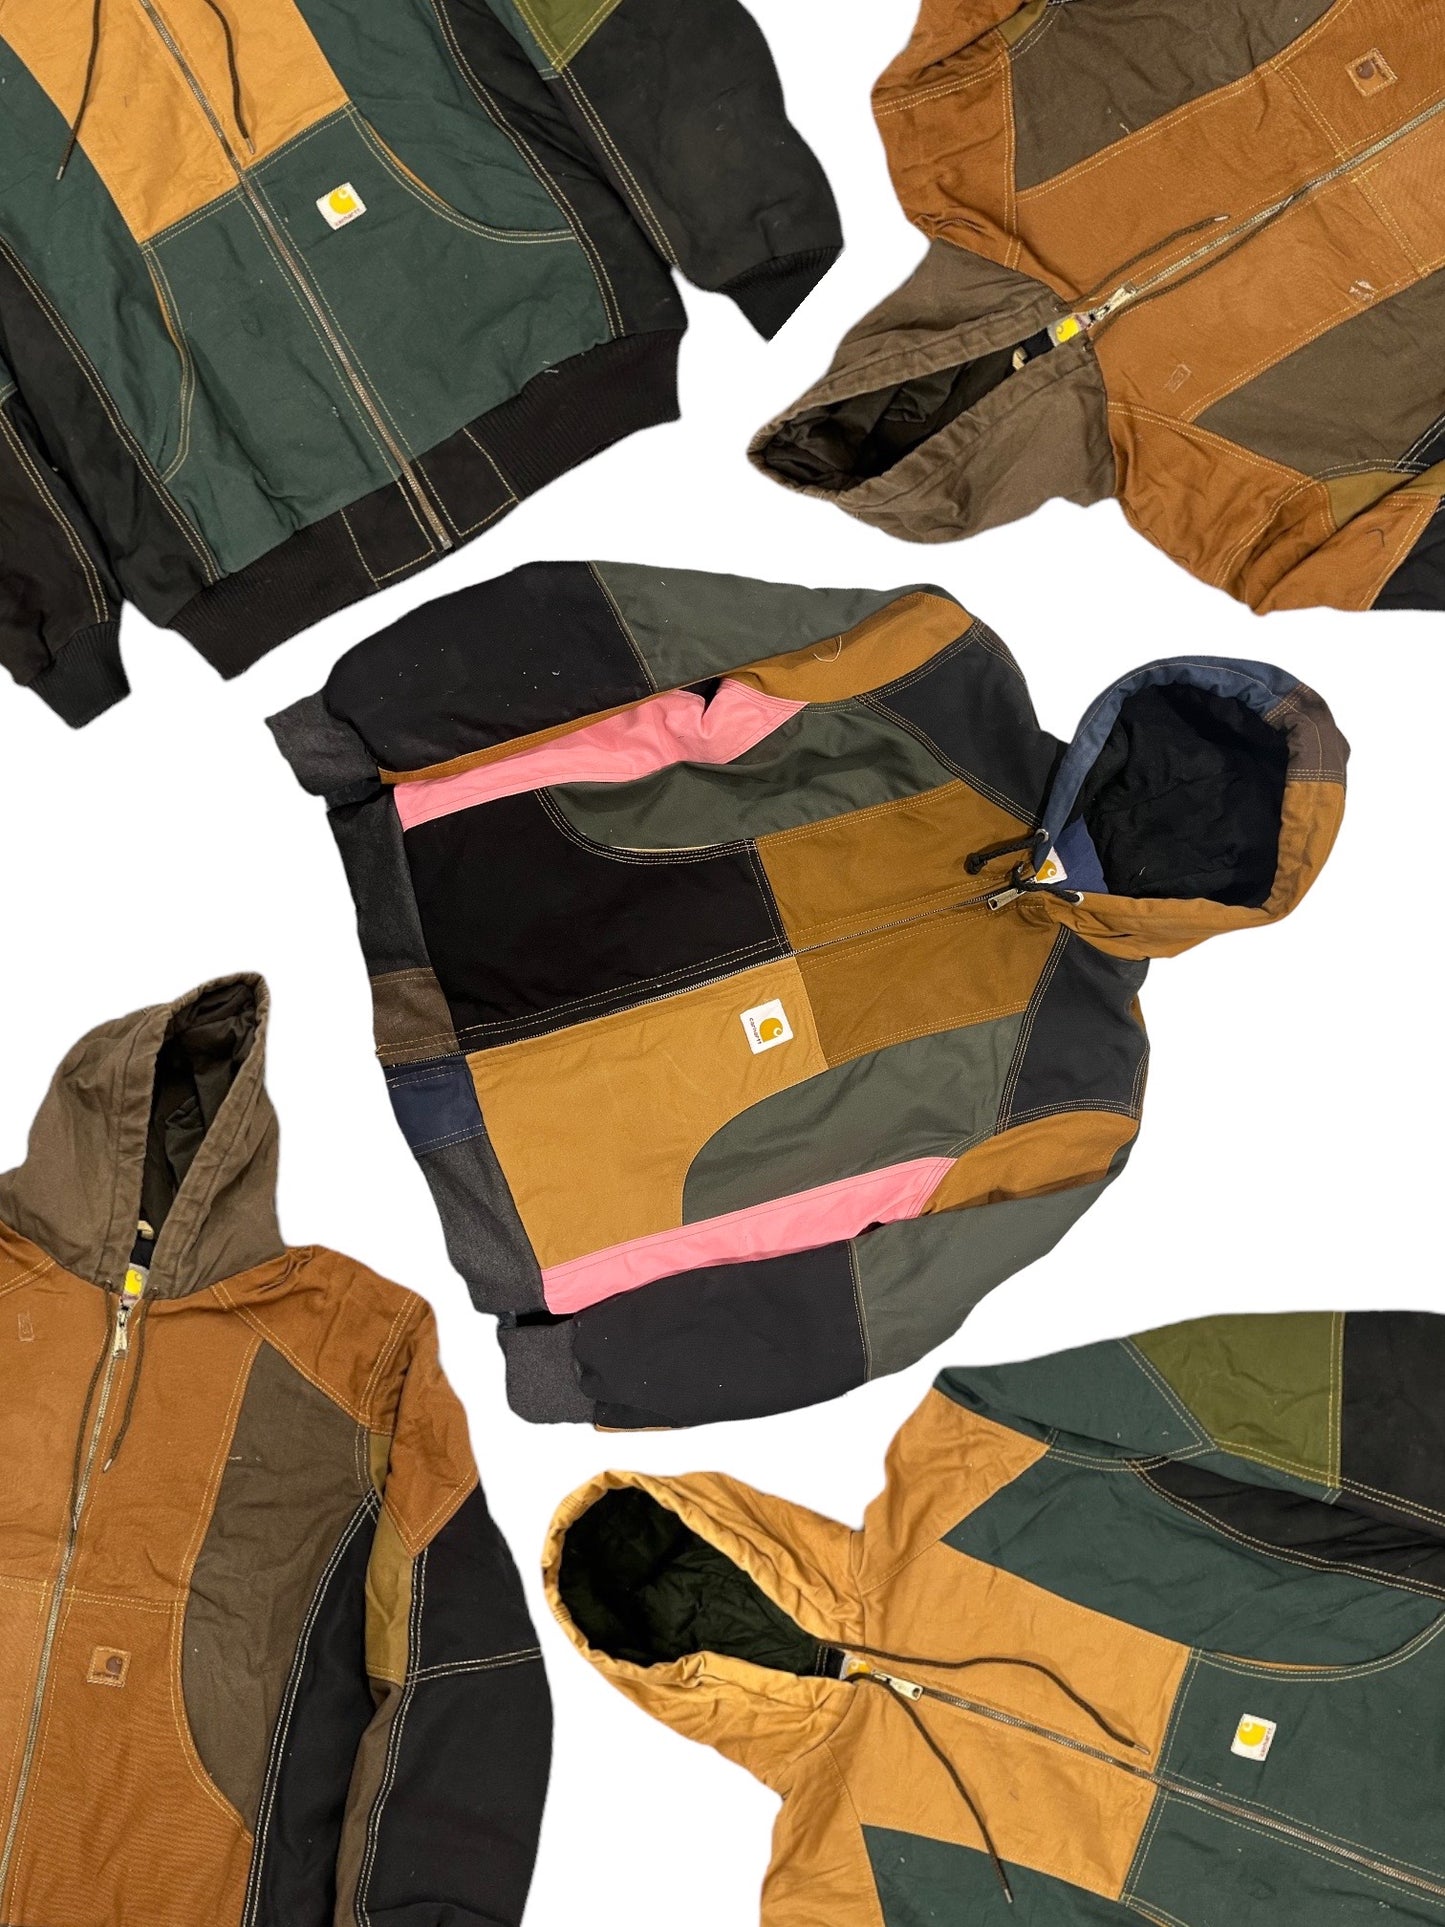 CARHARTT STYLE 1 REWORKED HOODED JACKETS